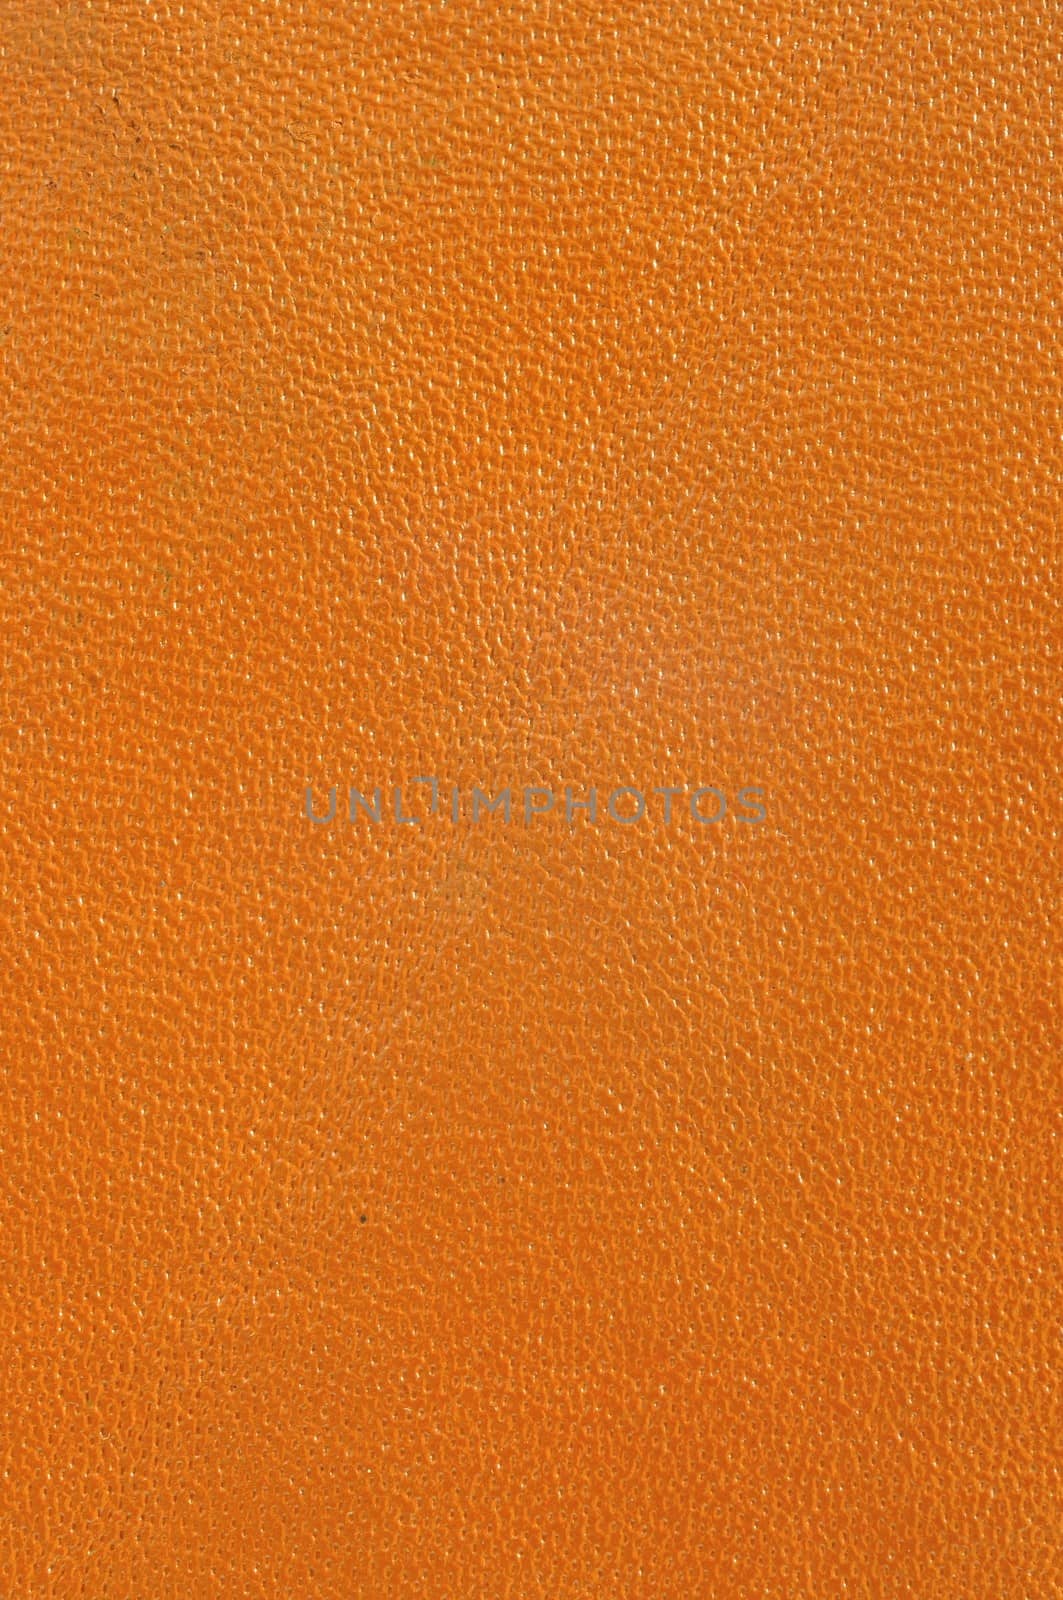 Close up texture of brown or orange leather for use as Background